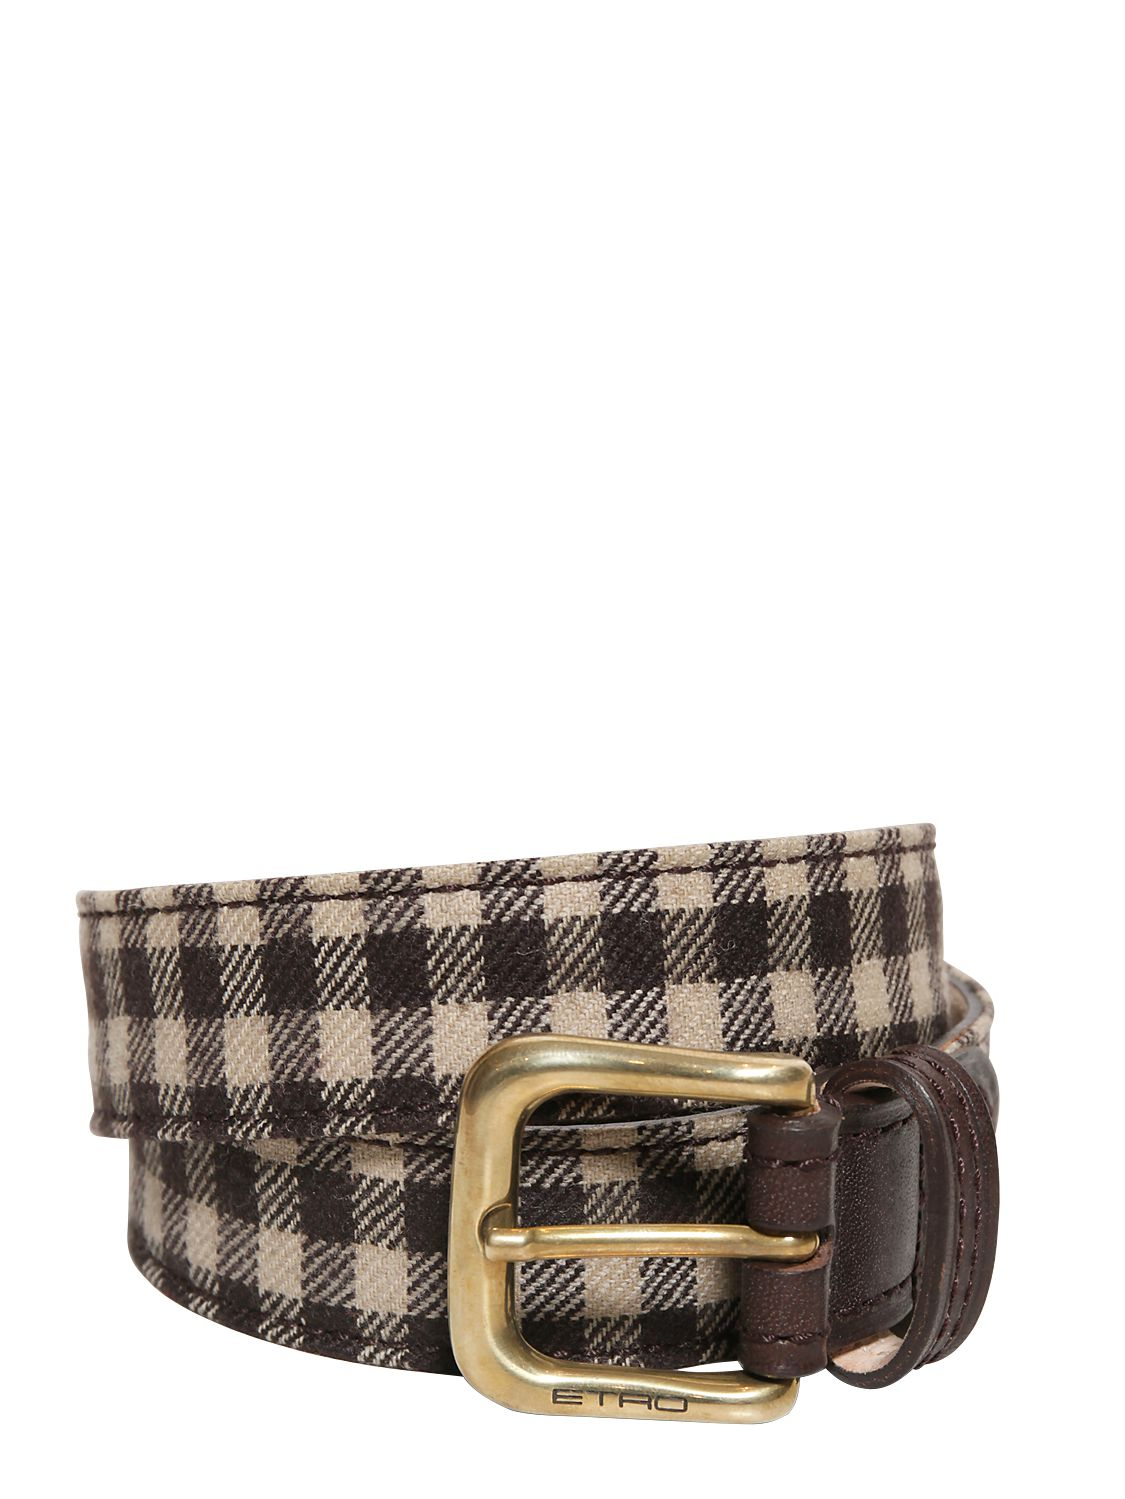 Lyst - Etro 30mm Gingham Wool & Leather Belt in Brown for Men